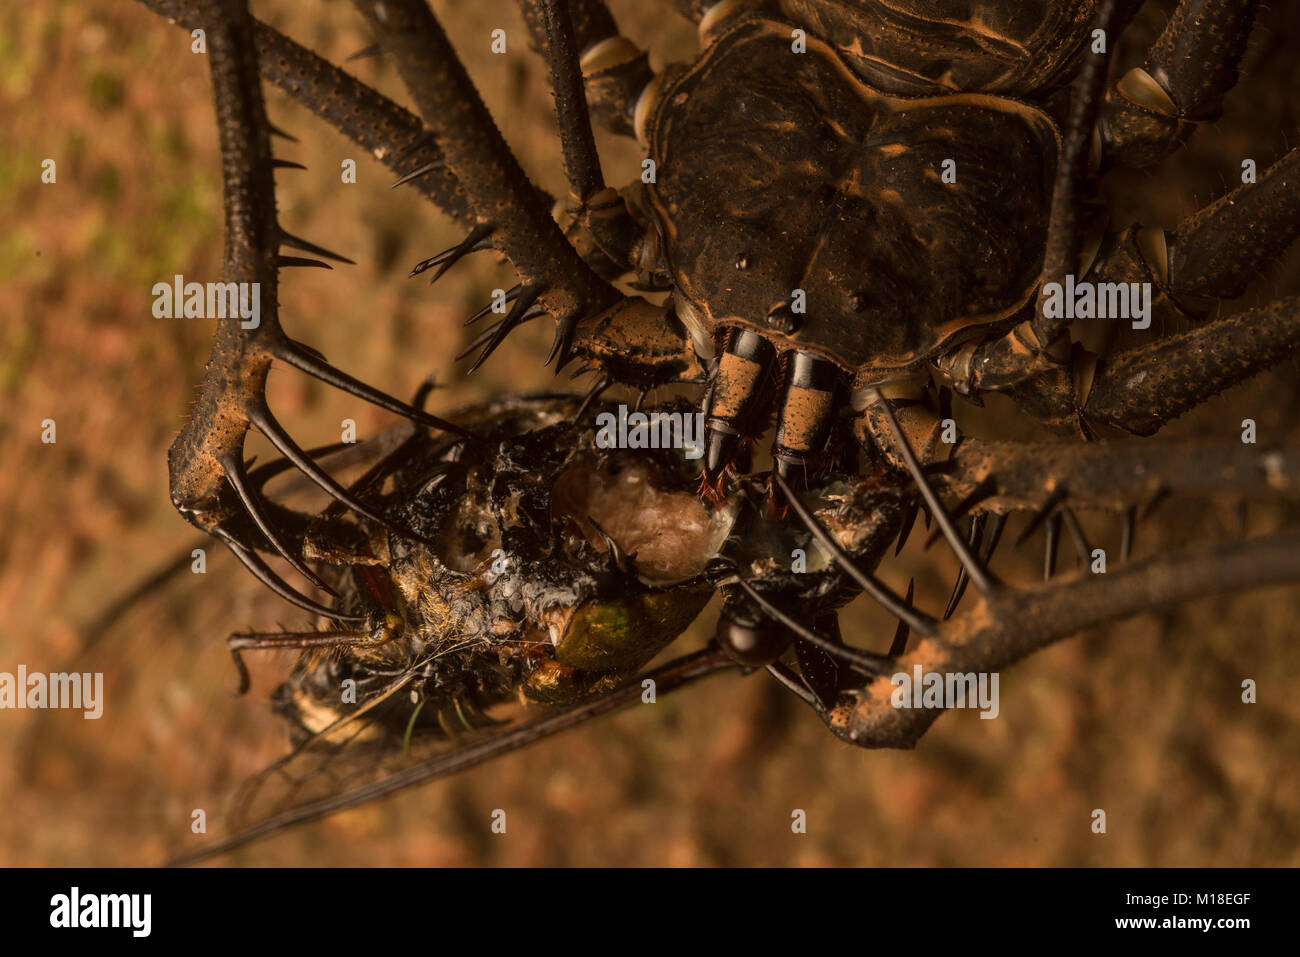 A tailless whip scorpion snacking on a cicada Stock Photo